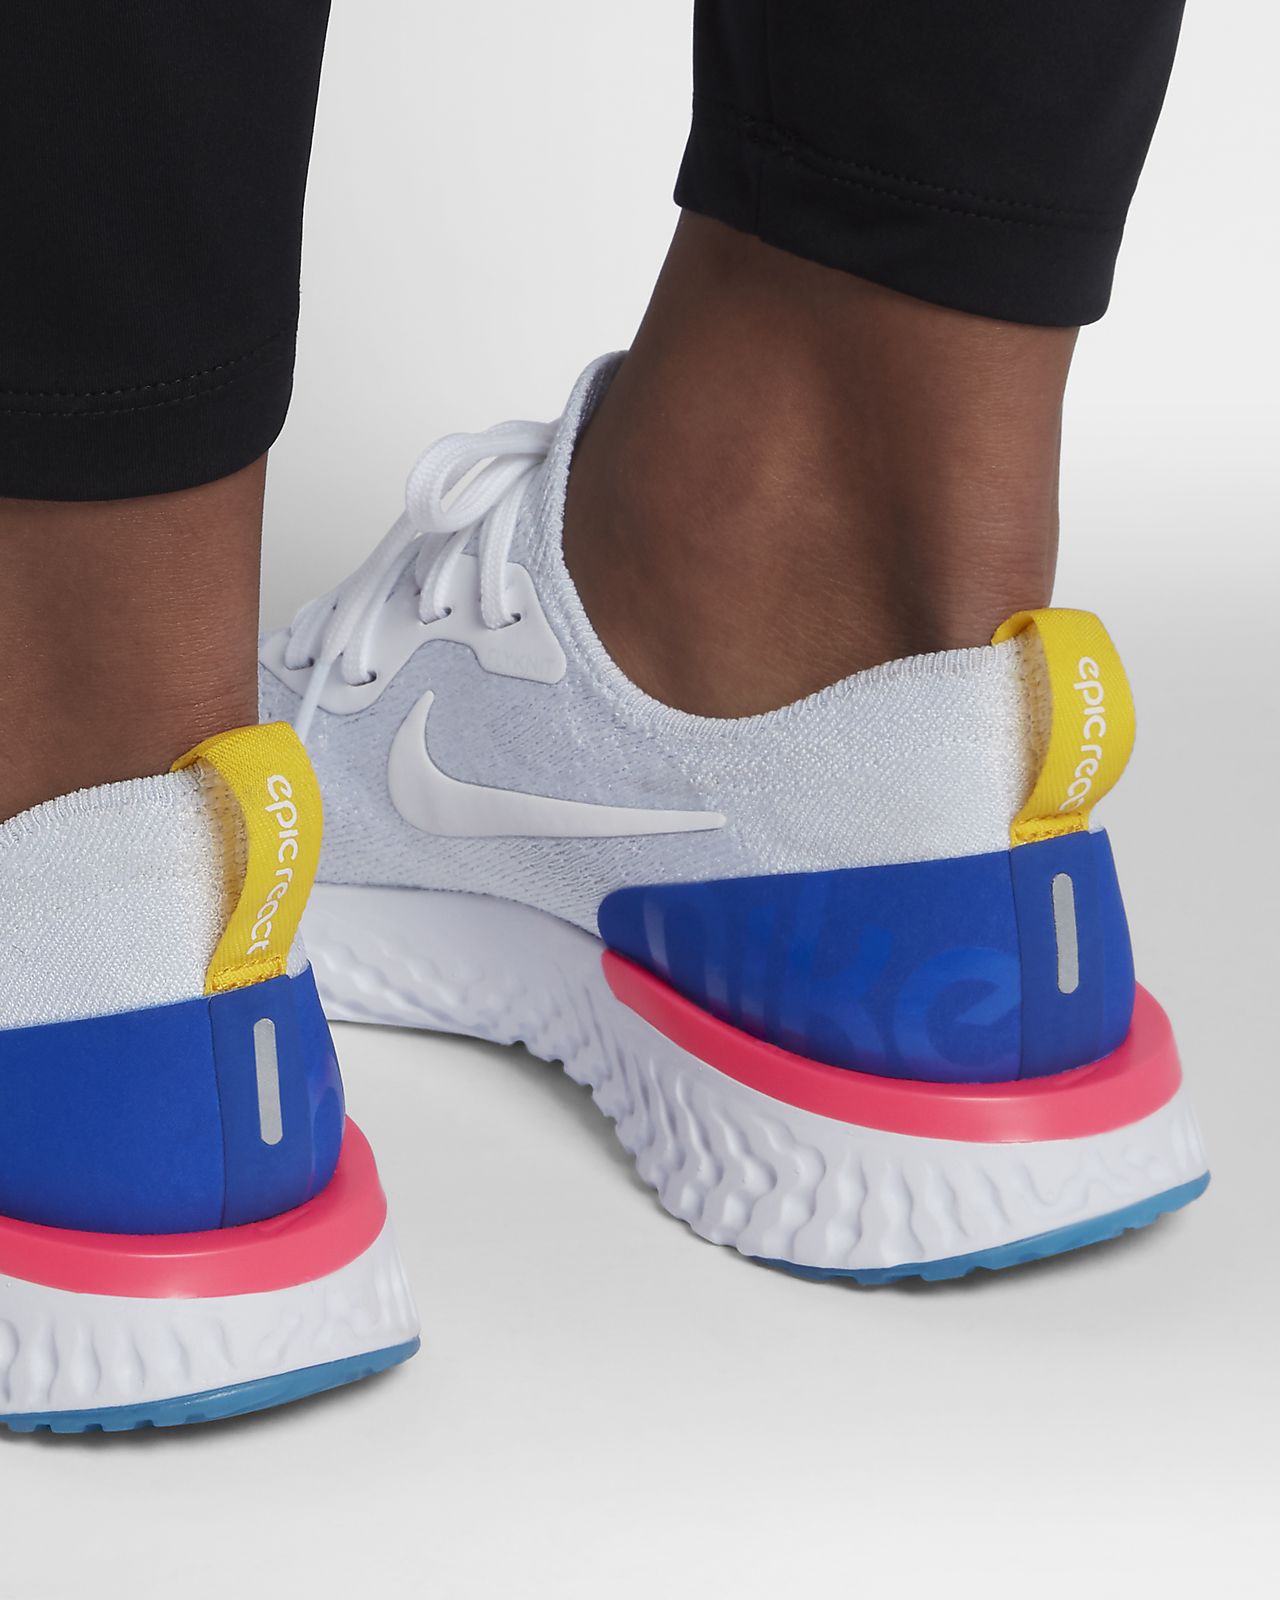 Nike Epic React Flyknit Athletic Shoes